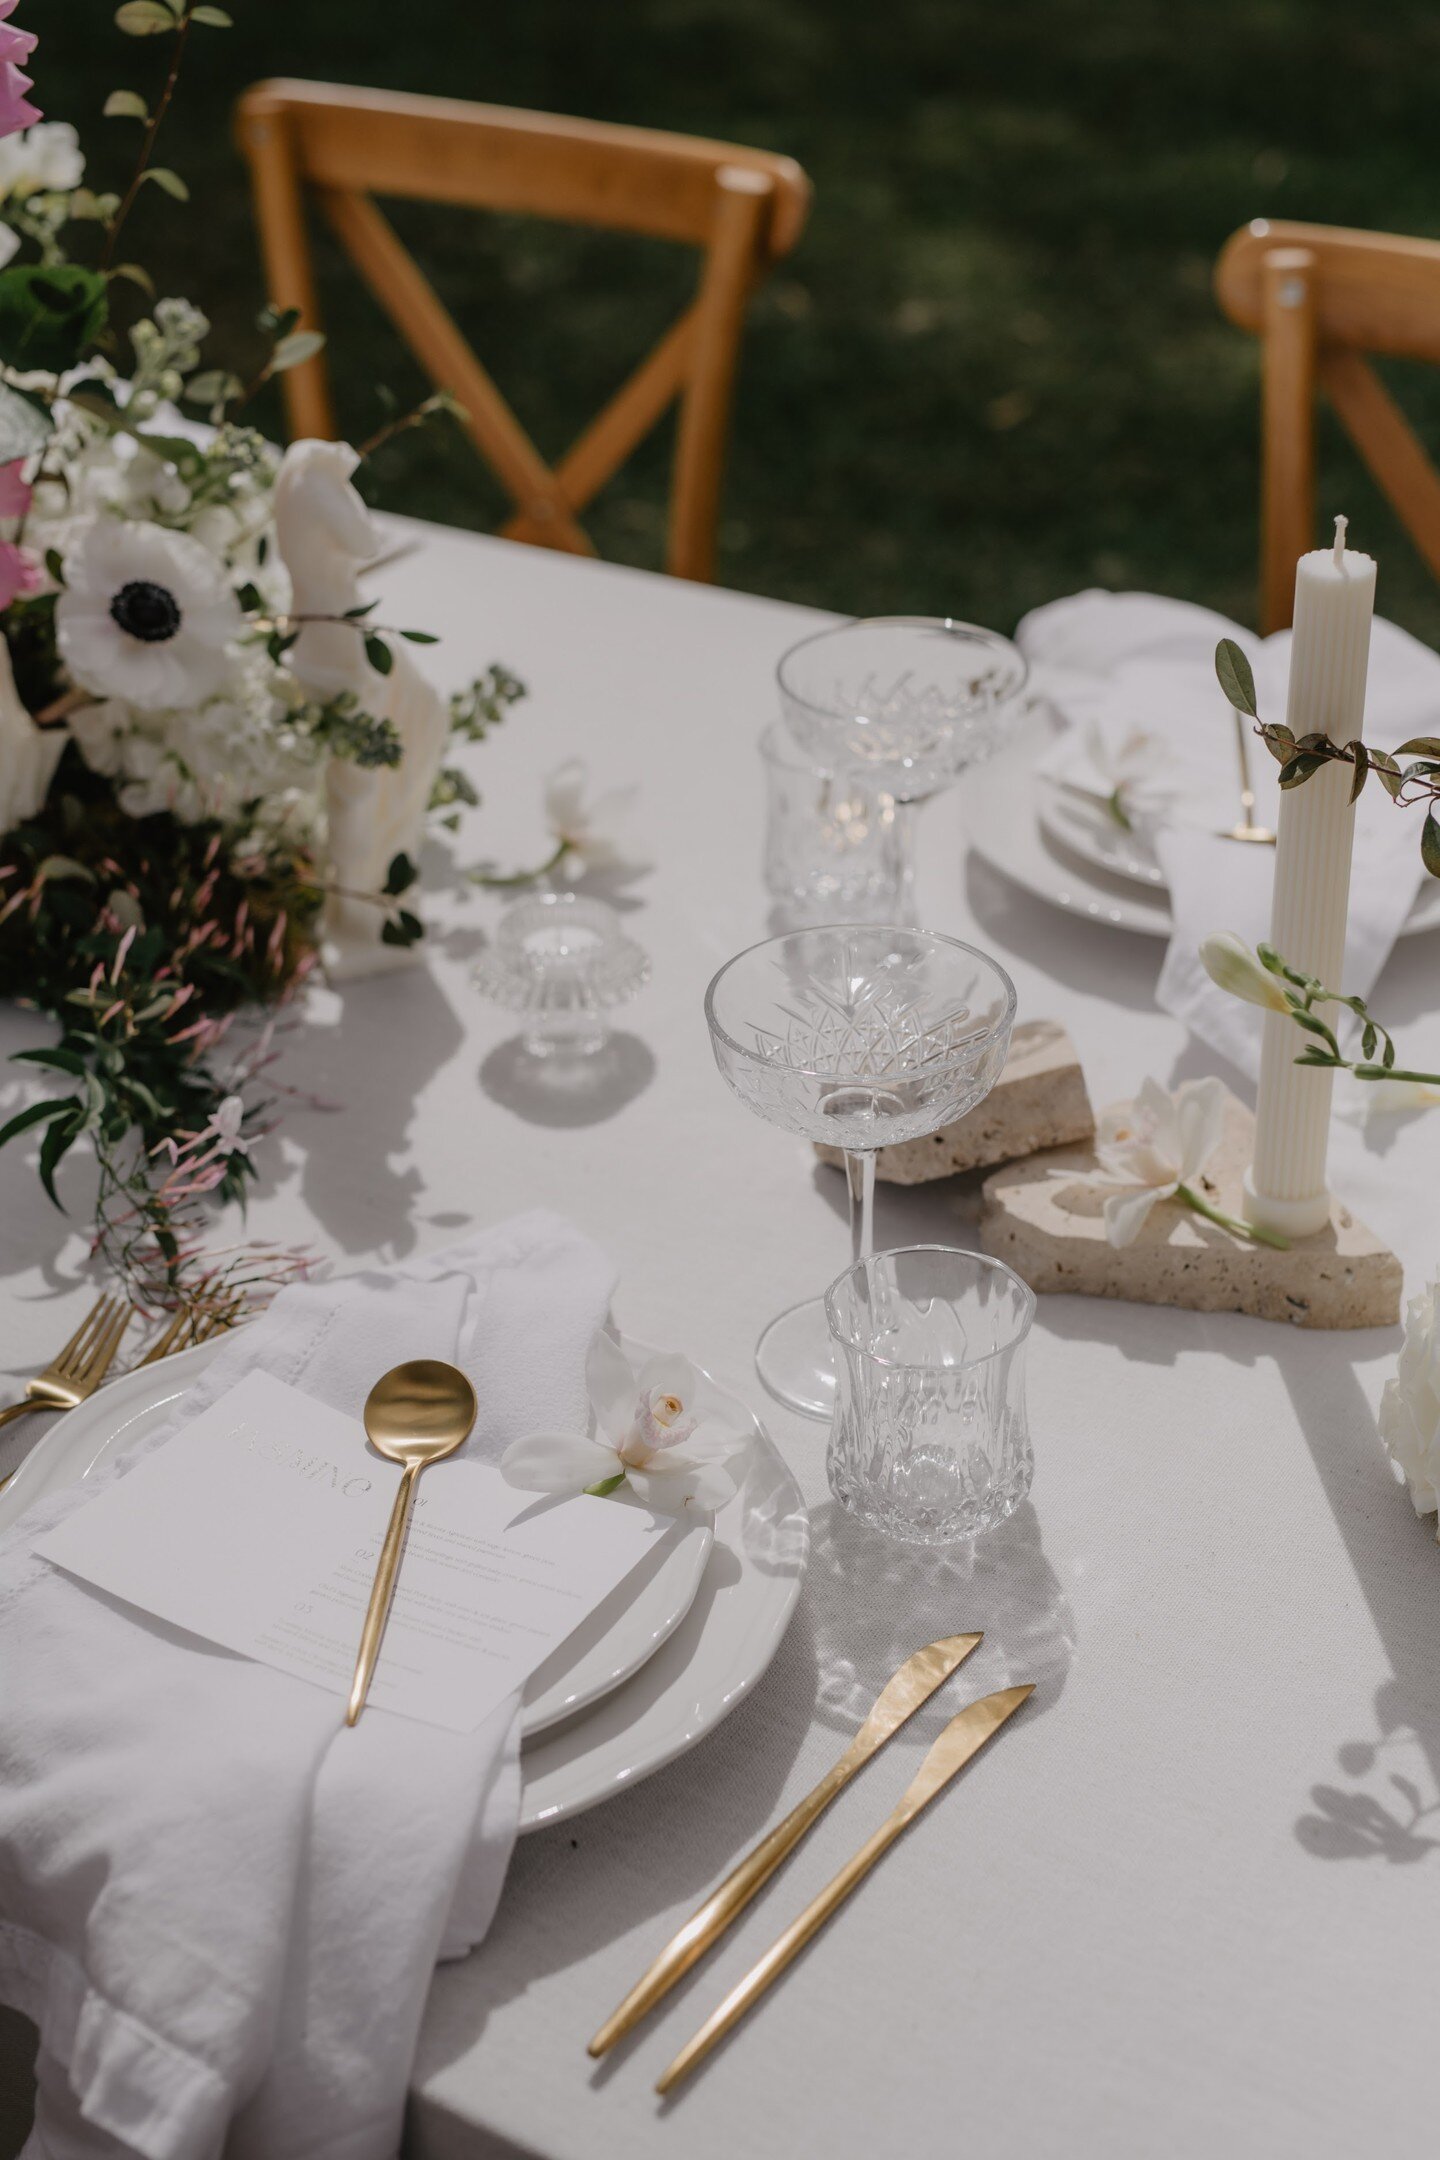 A romantic garden inspired tablescape sitting pretty at @braesideestategc creekside lawn 

Photographer @taylorkezia_photography
Stylist @boholuxeandco
Floral Stylist @floralsandco
Hire @theonedayhouse
Stationery &amp; Signage @signedwithlove.com.au
